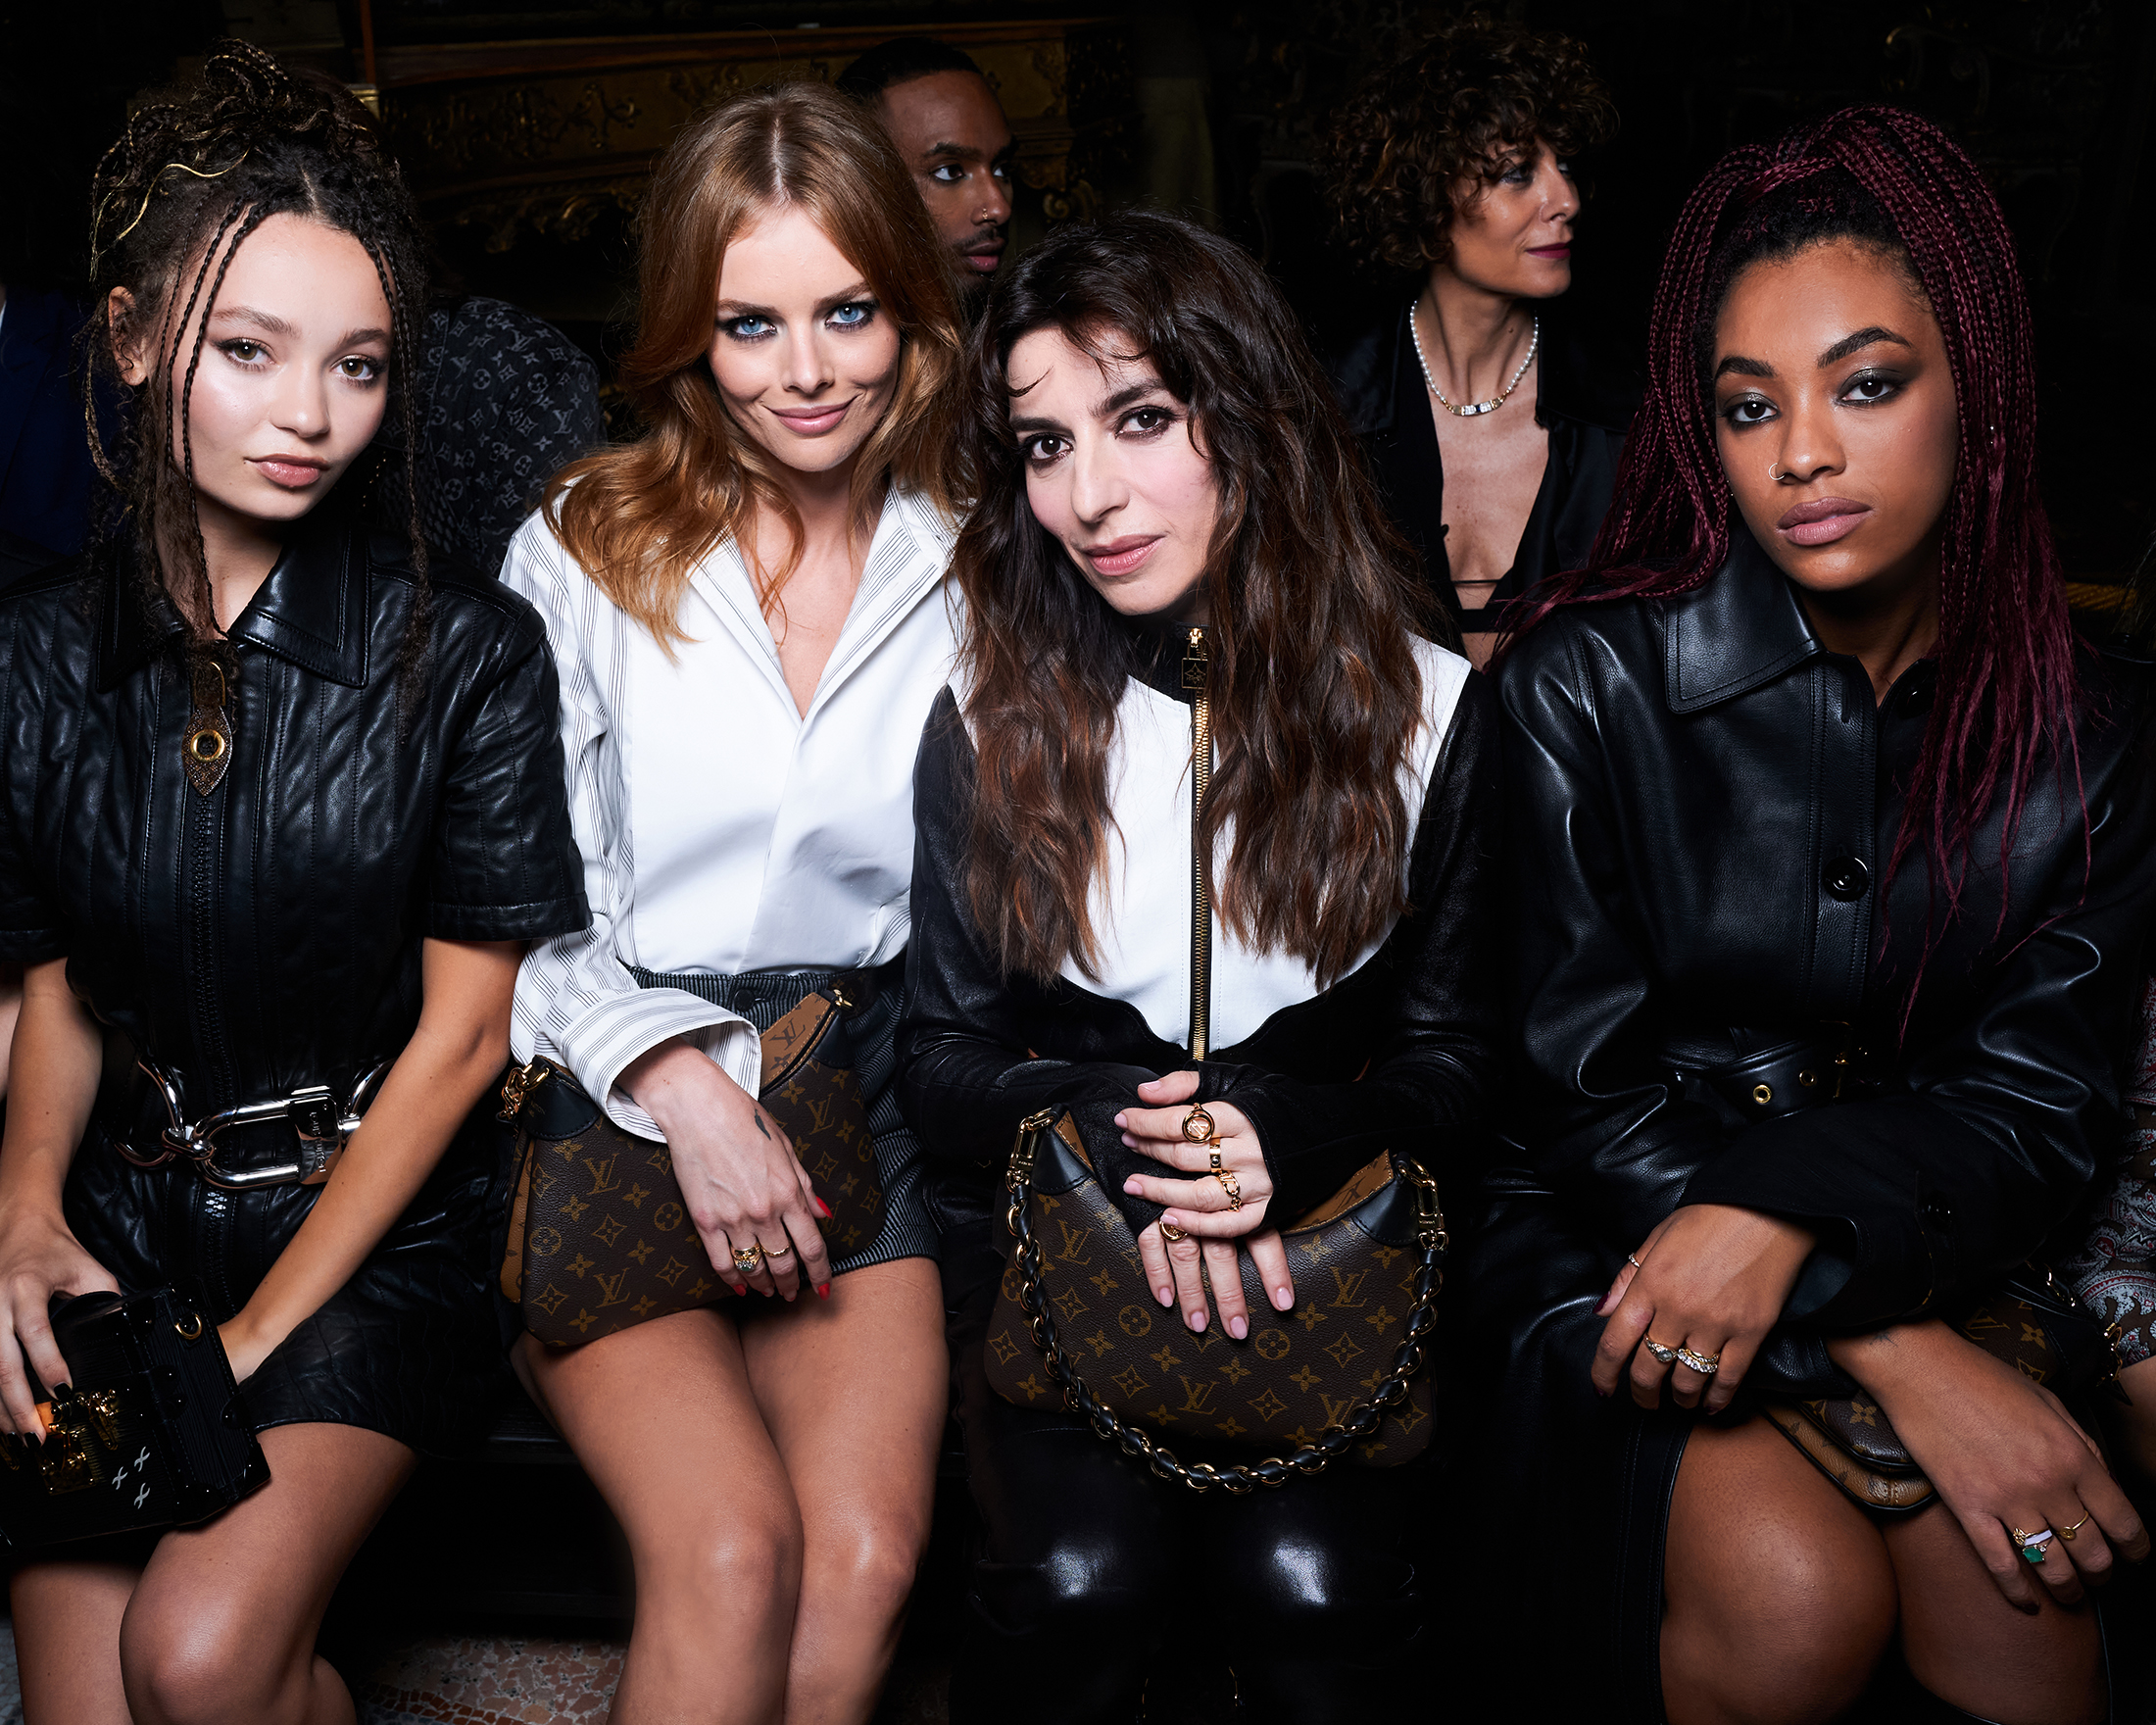 Louis Vuitton Resort 2016 - Daily Front Row